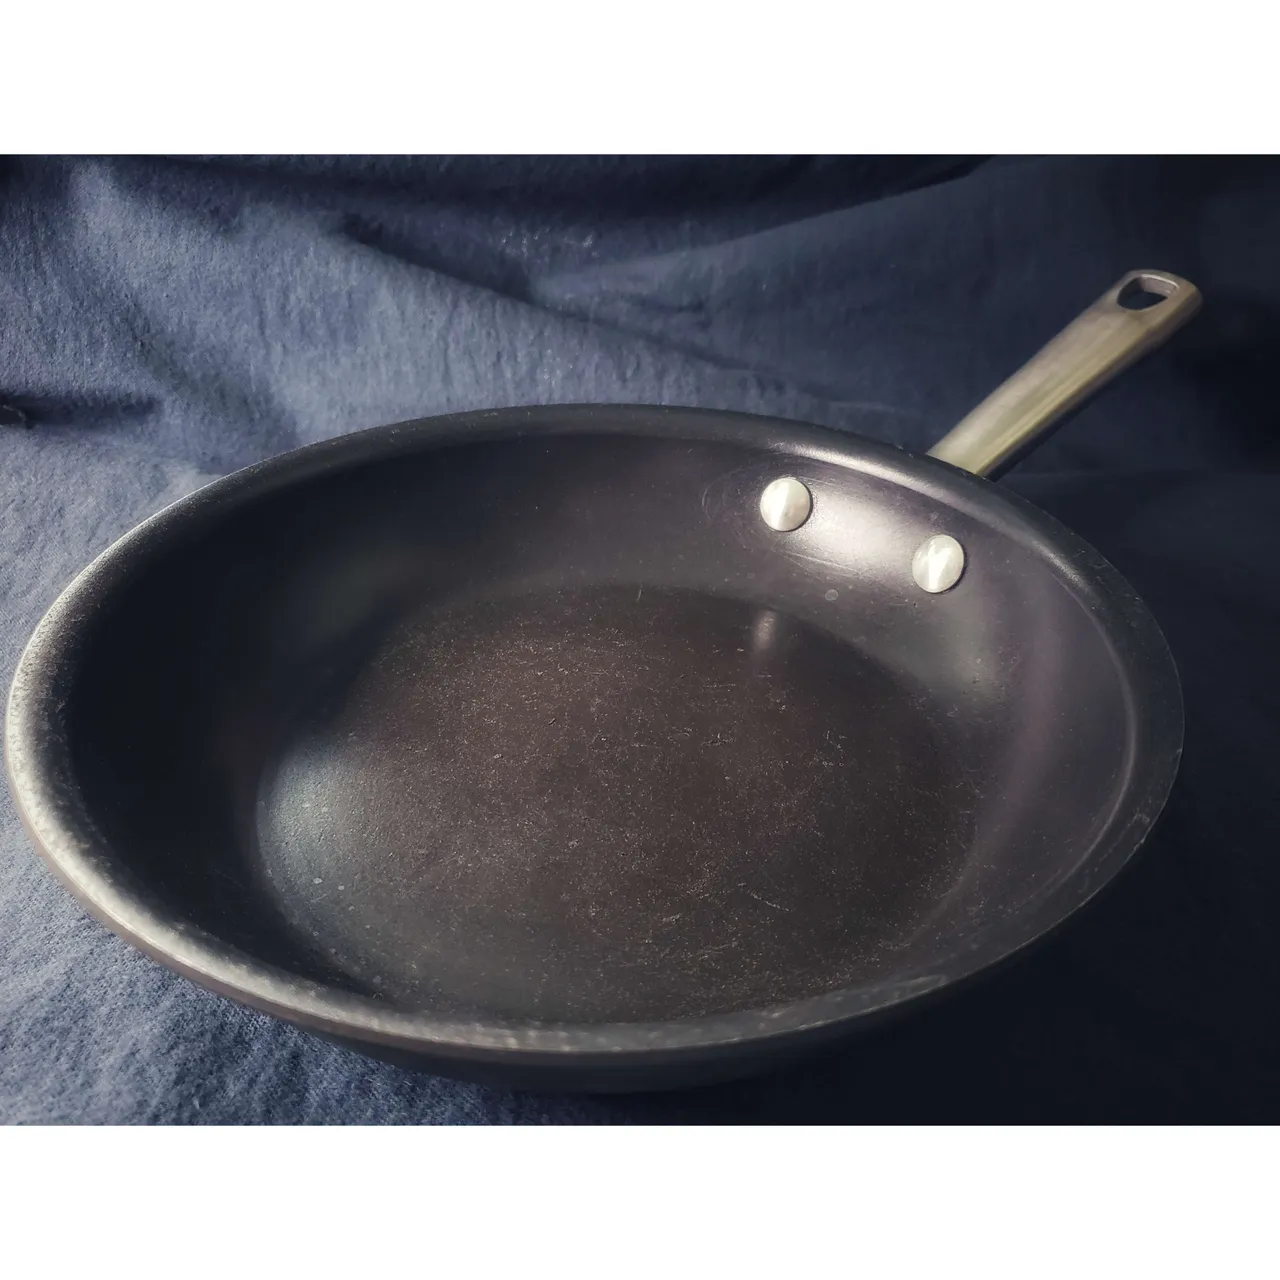 Skillet 8.5in/21.5cm - hard-anodized nonstick photo 1